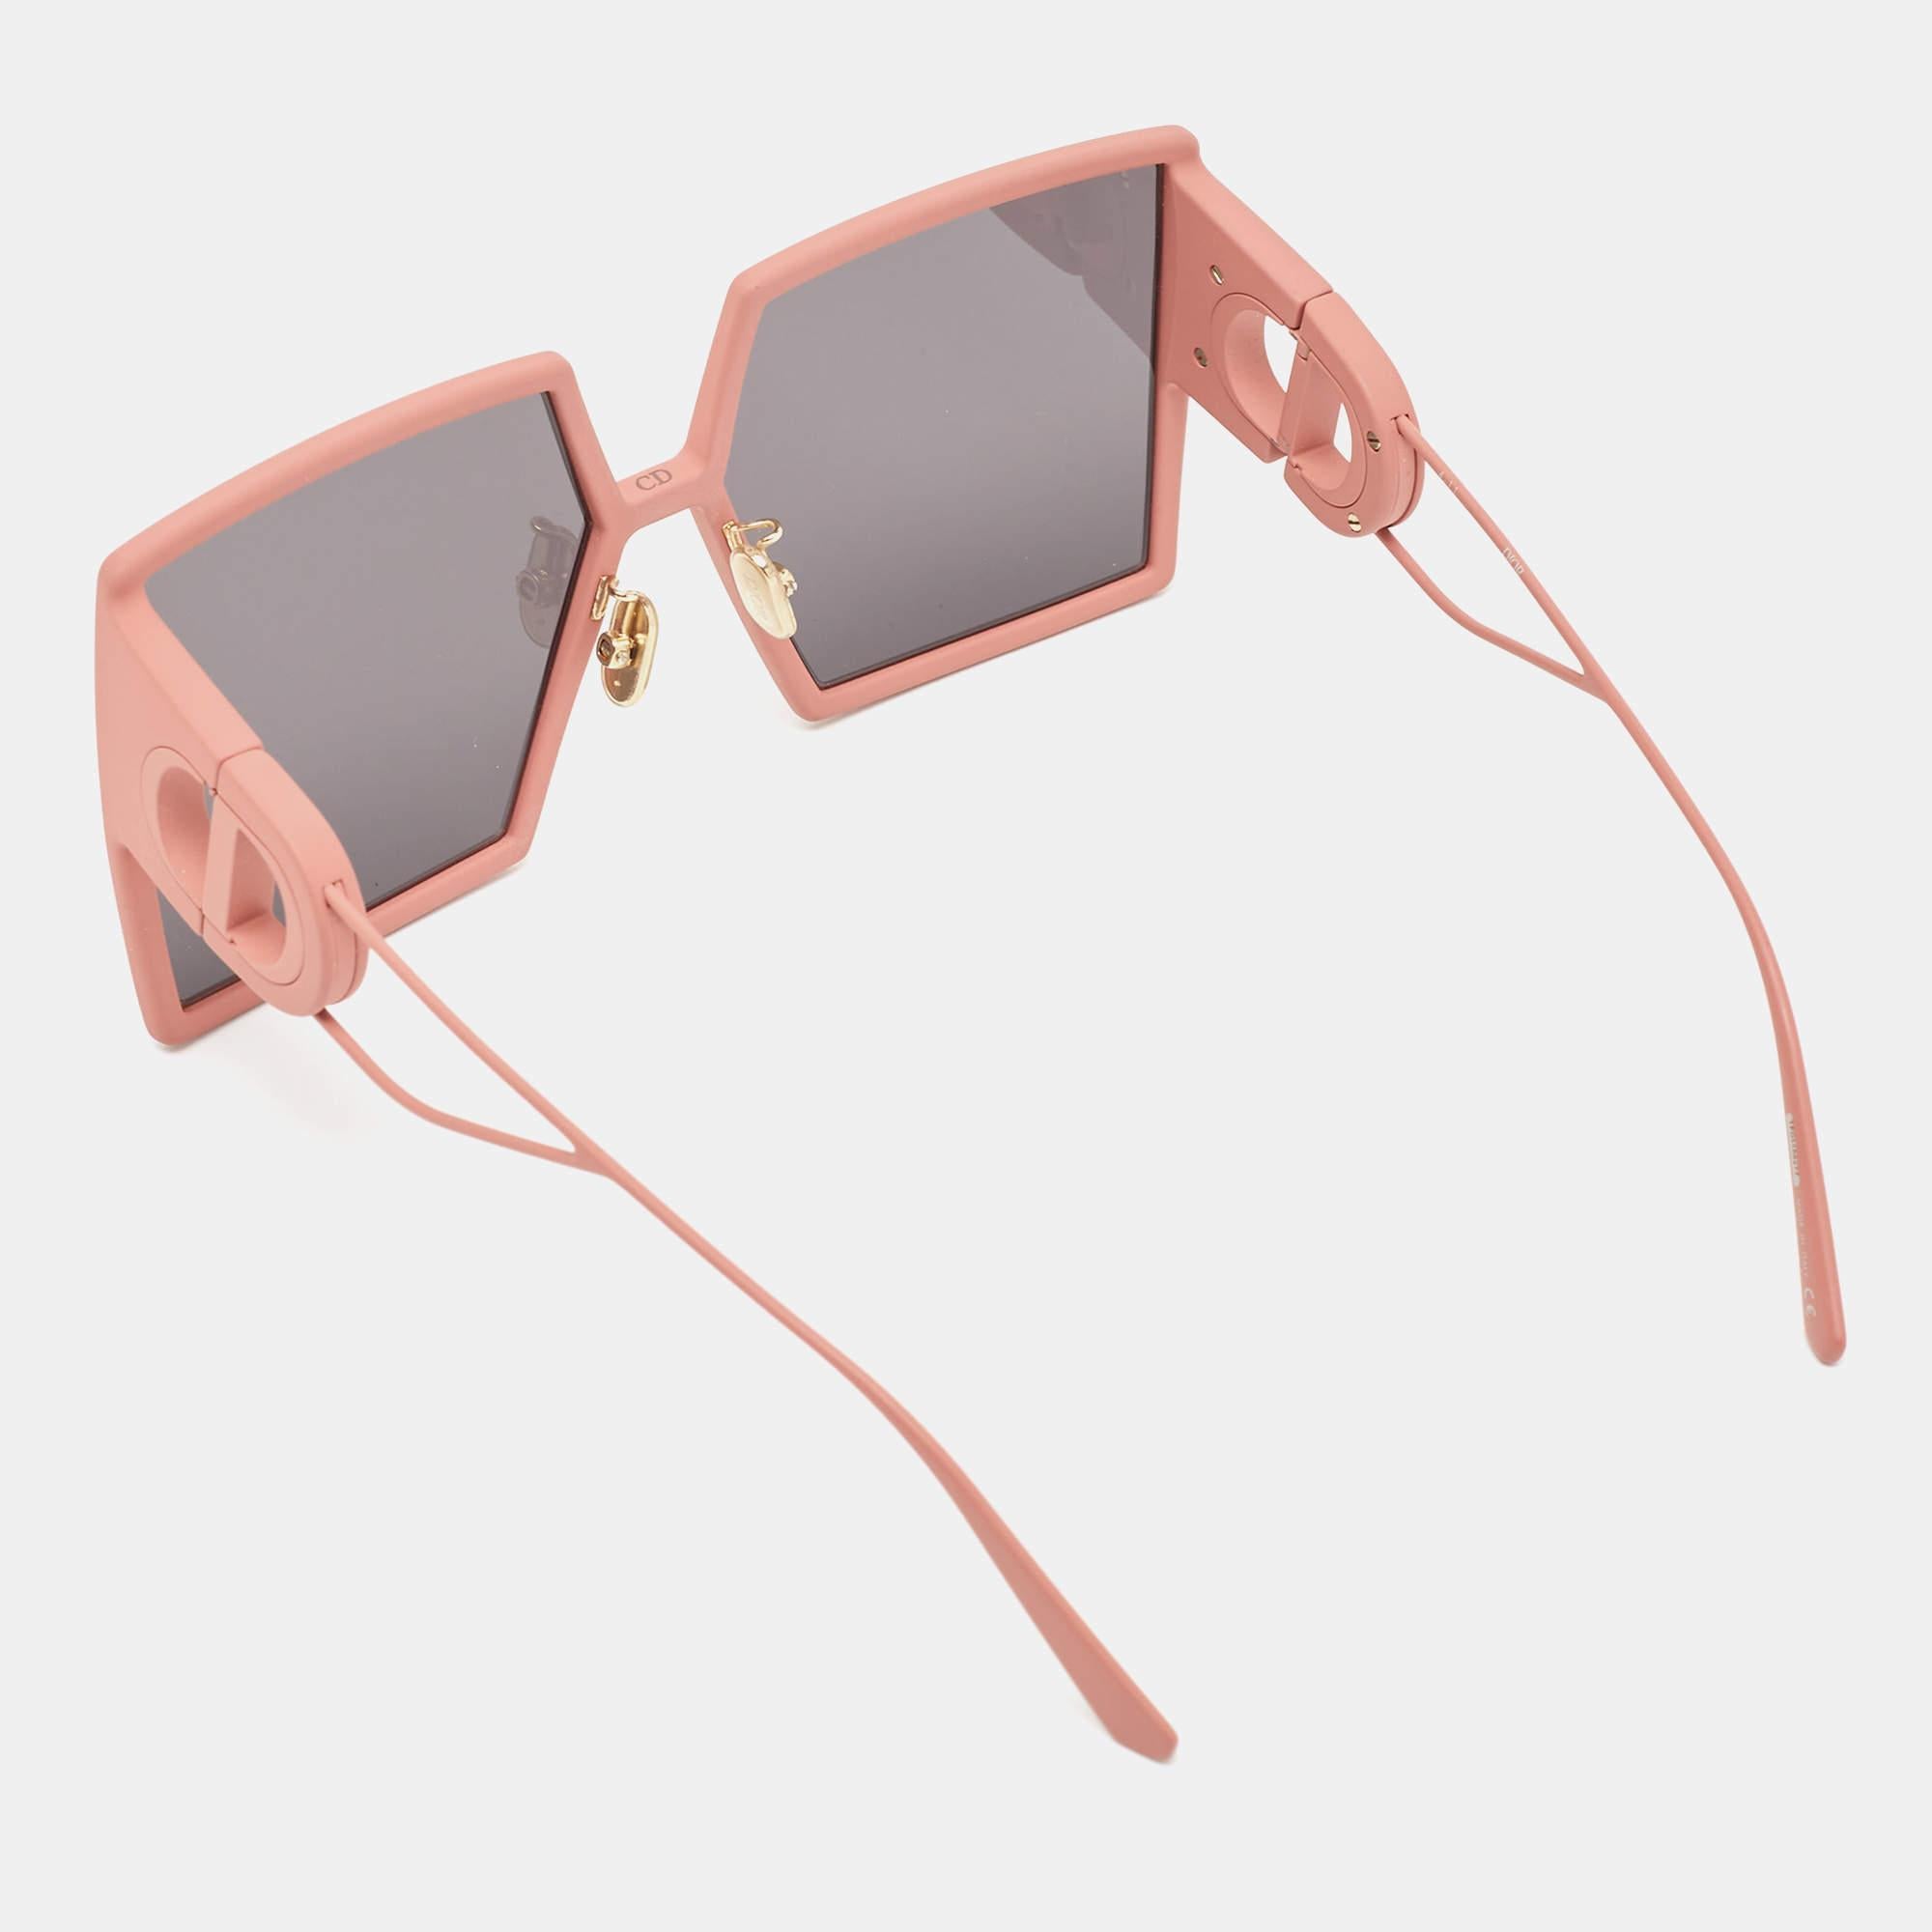 Embrace sunny days in full style with the help of this pair of Dior sunglasses. Created with expertise, the luxe sunglasses feature a well-designed frame and high-grade lenses that are equipped to protect your eyes.

Temple Length: 130 mm
Bridge